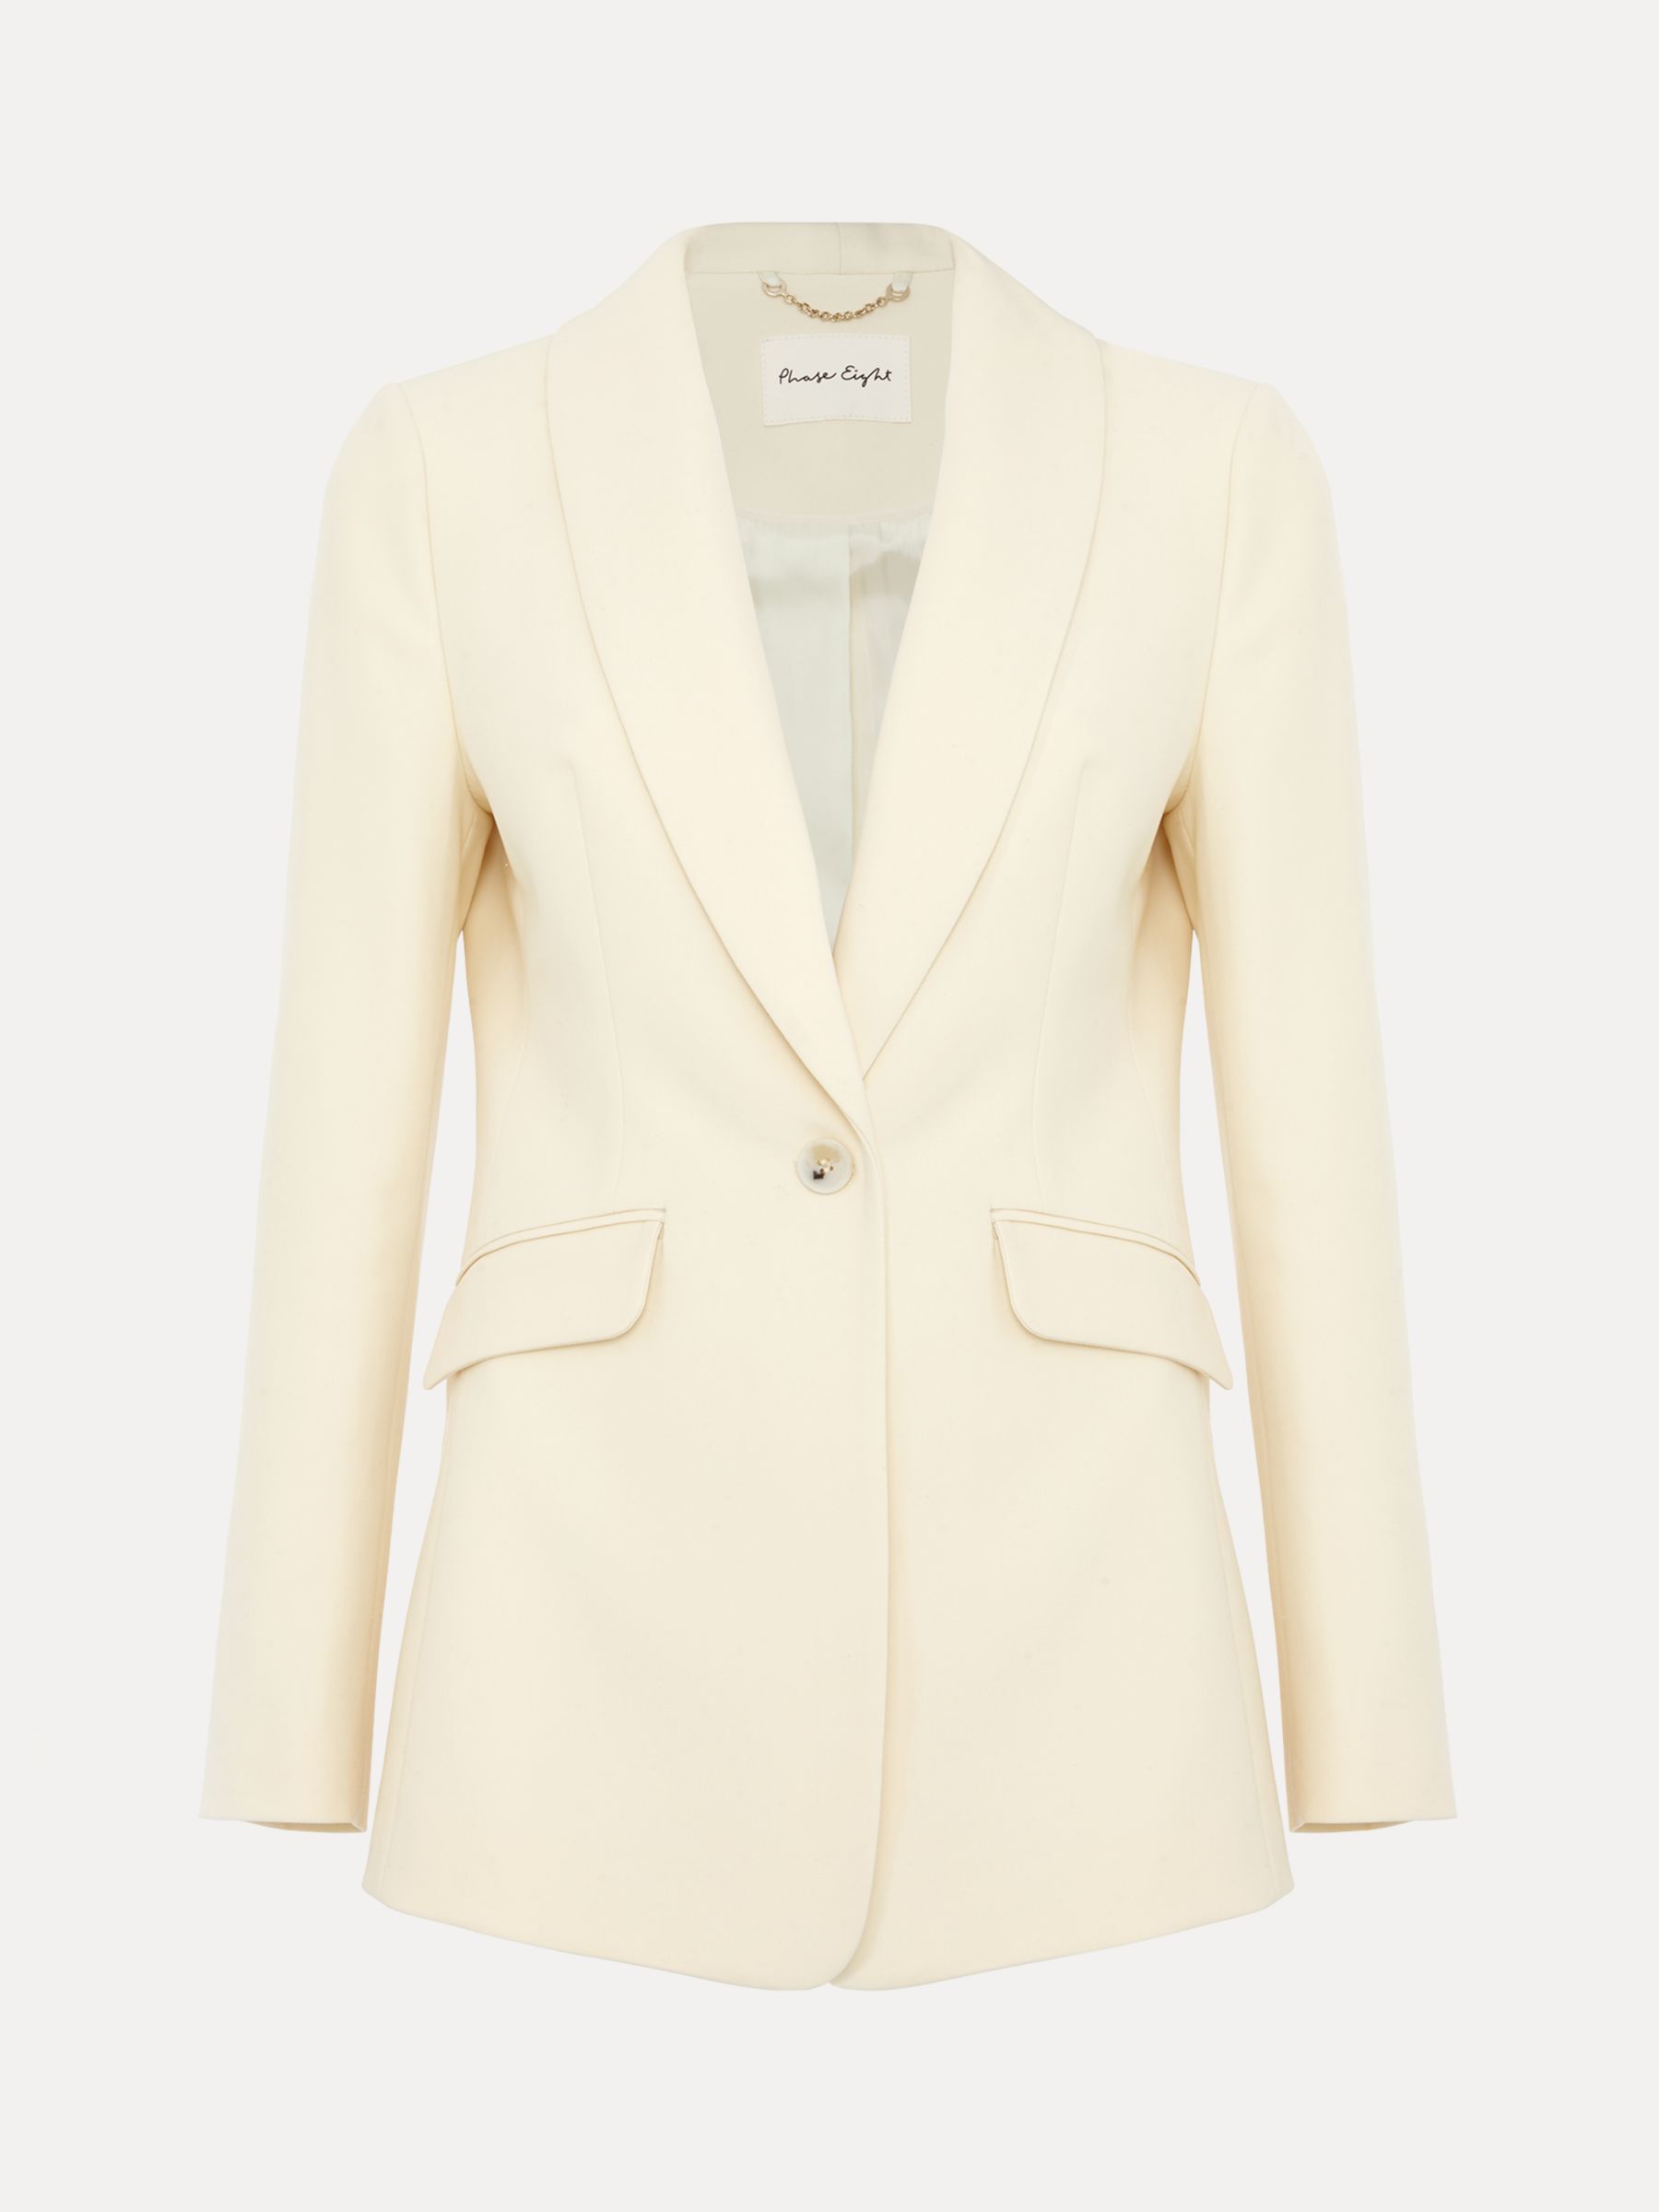 Phase Eight Alexis Shawl Collar Suit Jacket, Yellow, 16